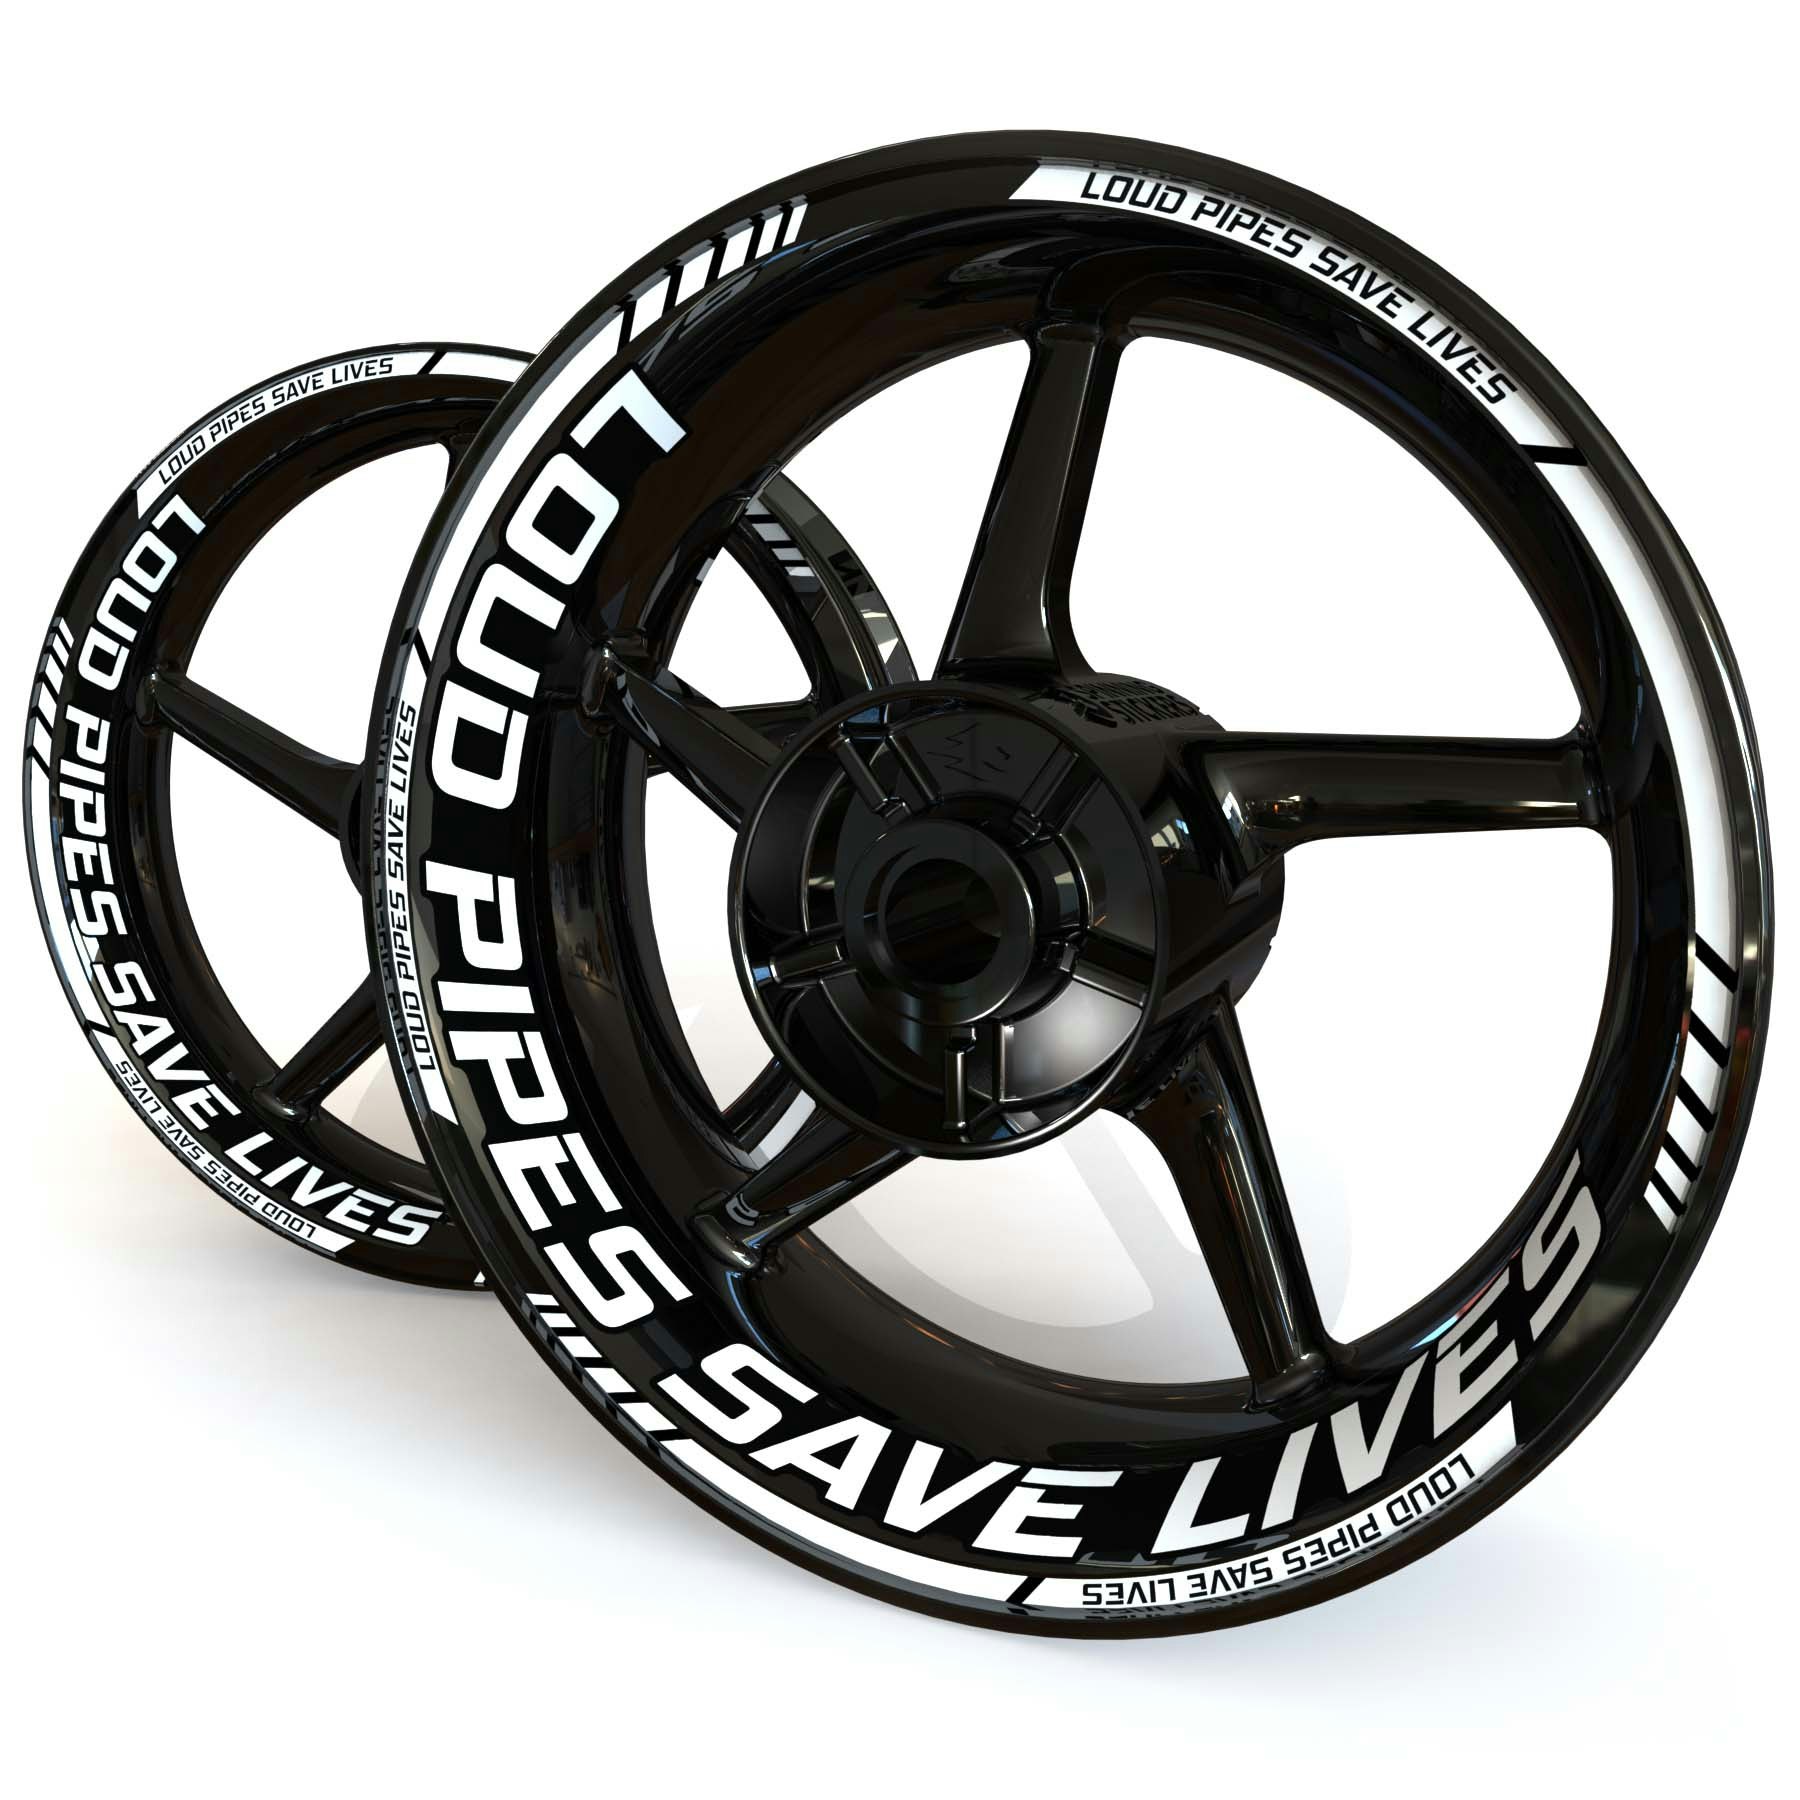 Wheel Stickers - "Load Pipes Save Lives" Standard design